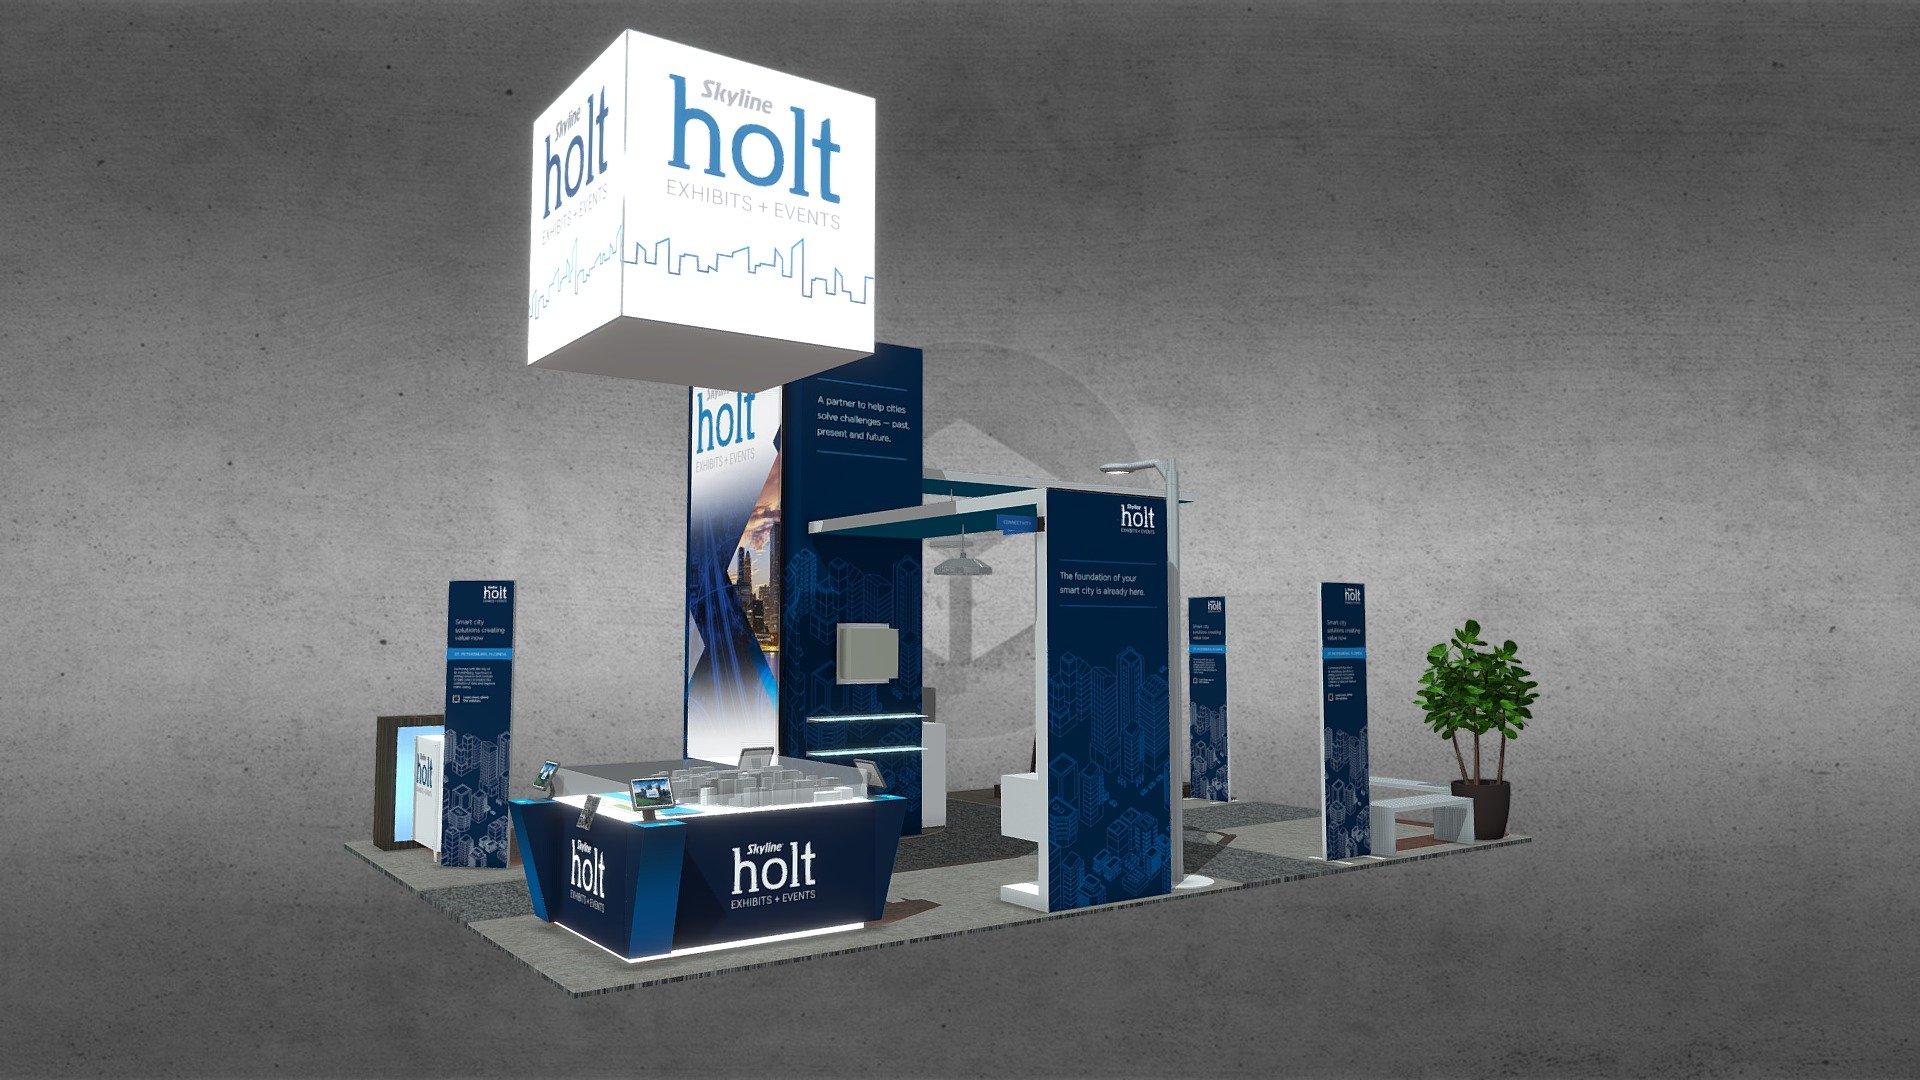 Come and visit our virtual exhibit.  Walk around and explore each demo area 3d model